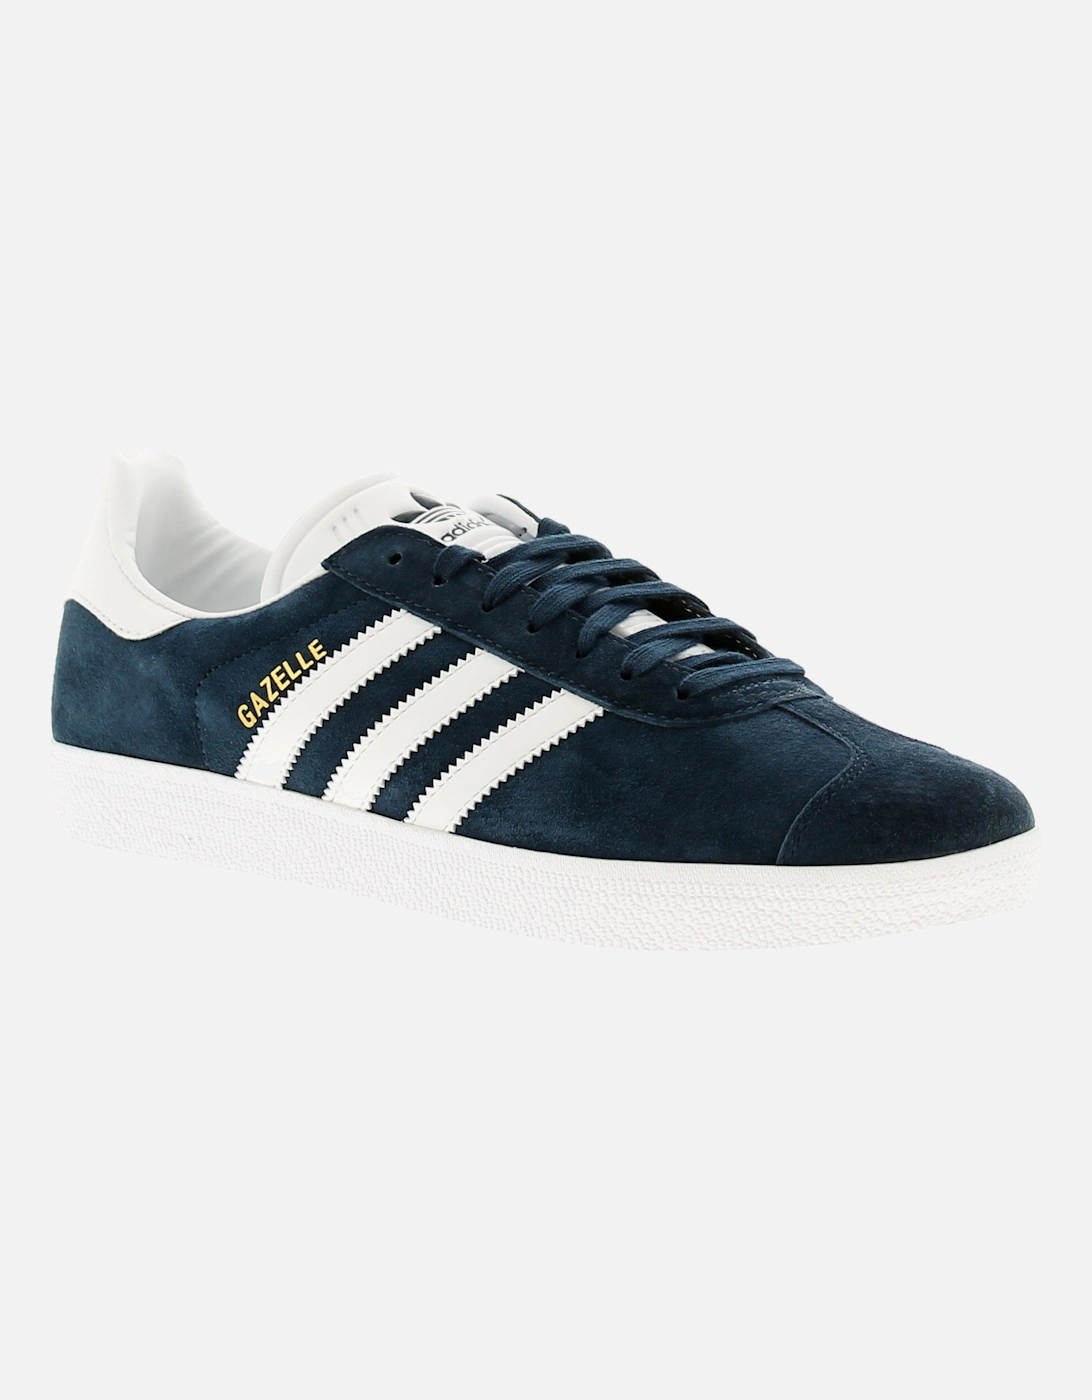 Adidas Originals Mens Trainers Gazelle Leather Lace Up navy UK Size, 6 of 5